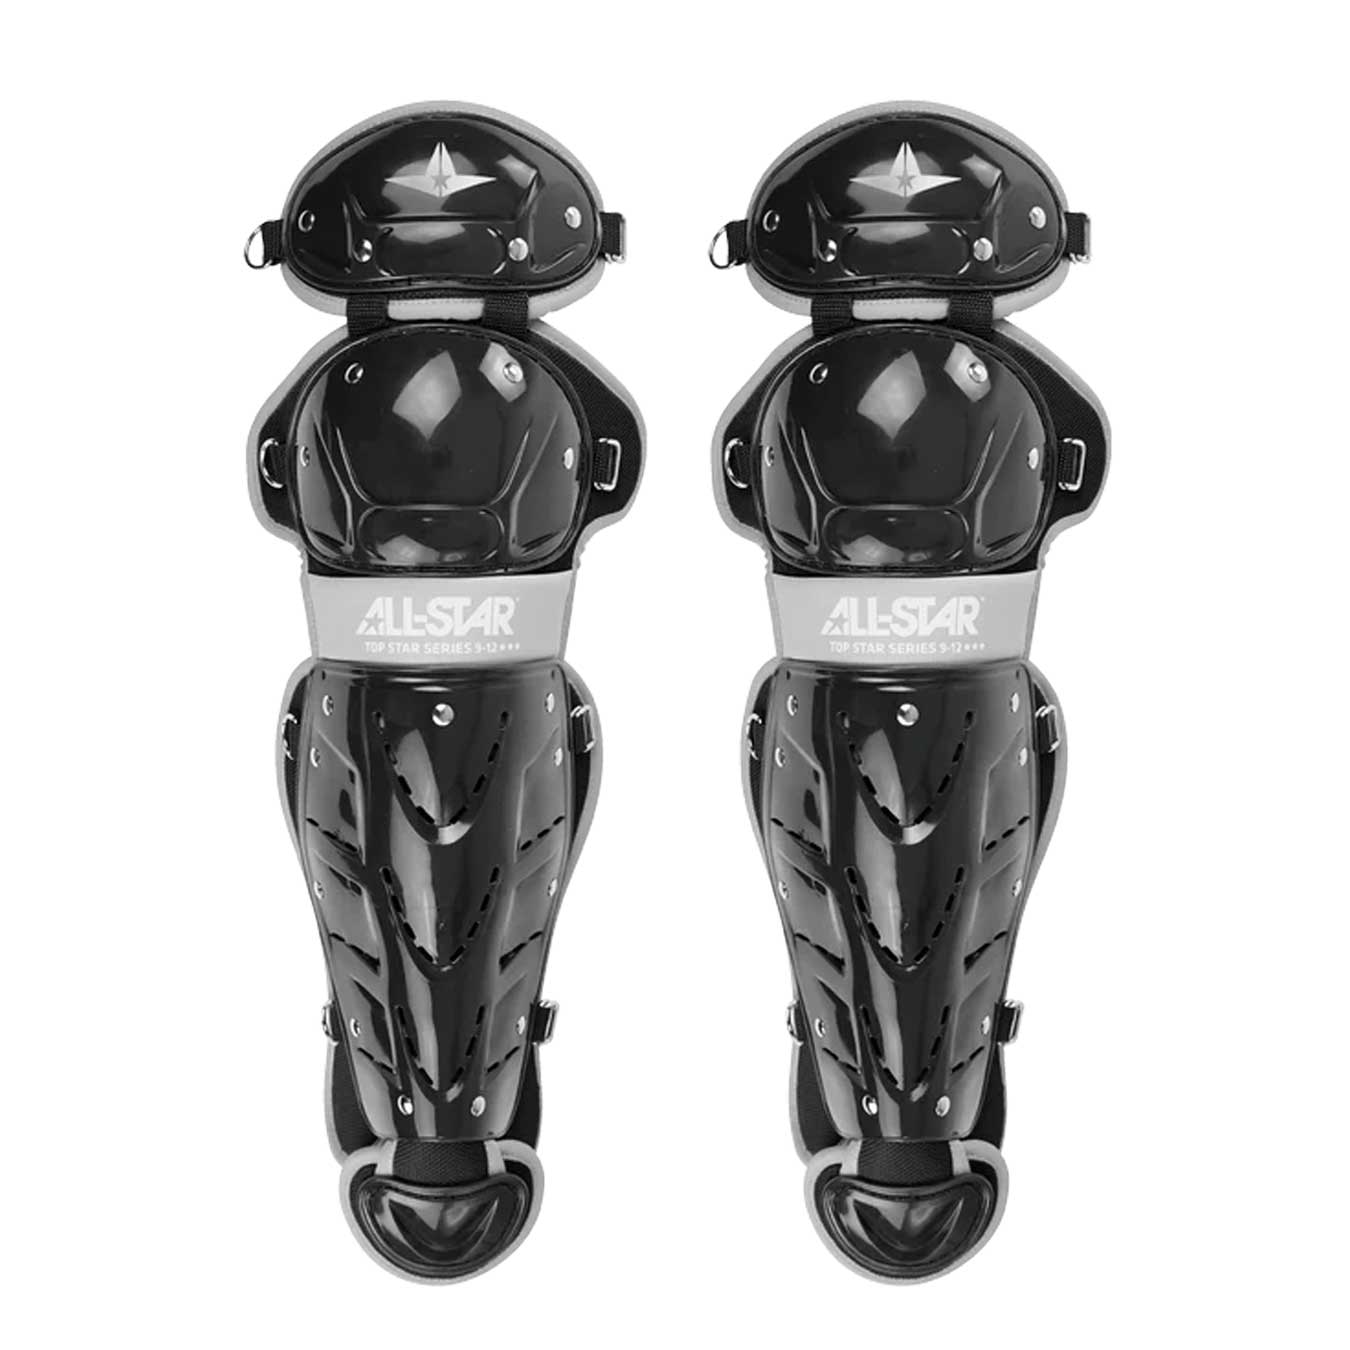 All-Star Top Star Leg Guards LG-TS-912 Ages 9-12 13.5"